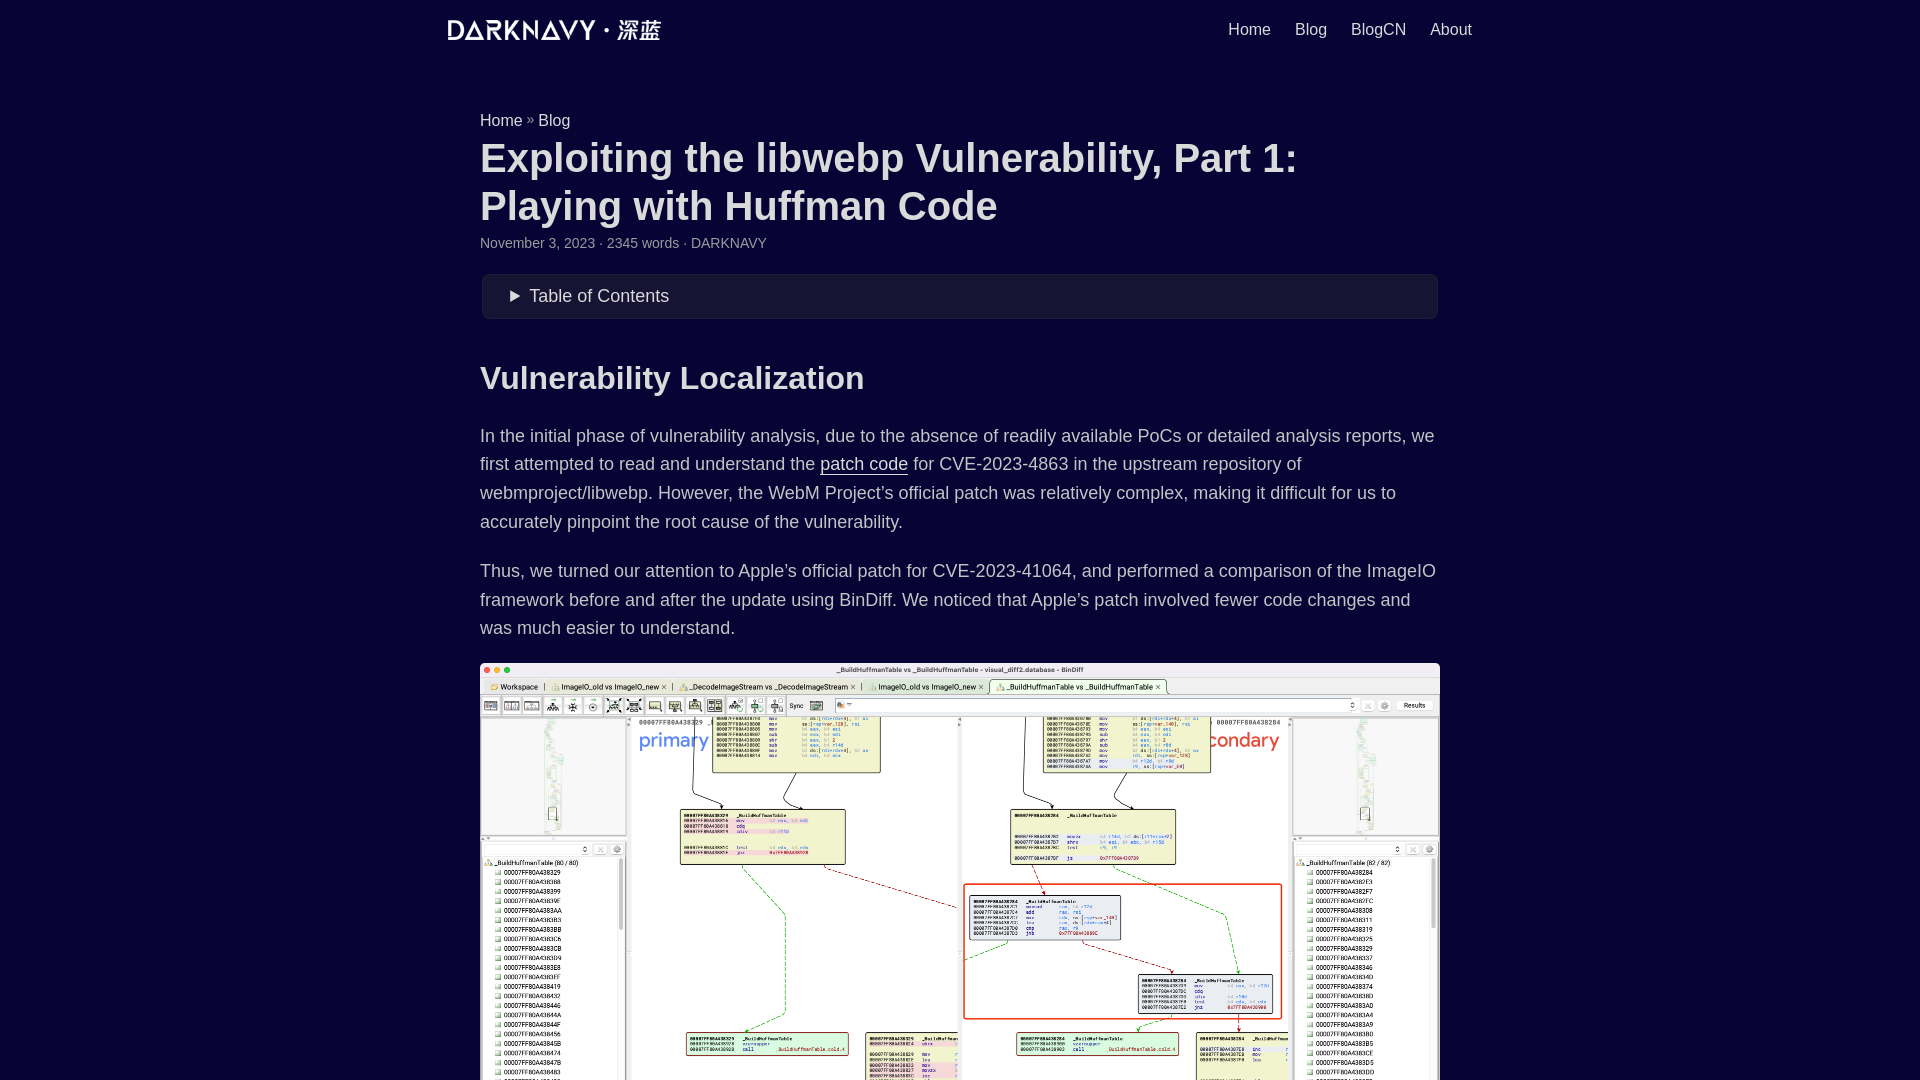 Exploiting the libwebp Vulnerability, Part 1: Playing with Huffman Code | DARKNAVY